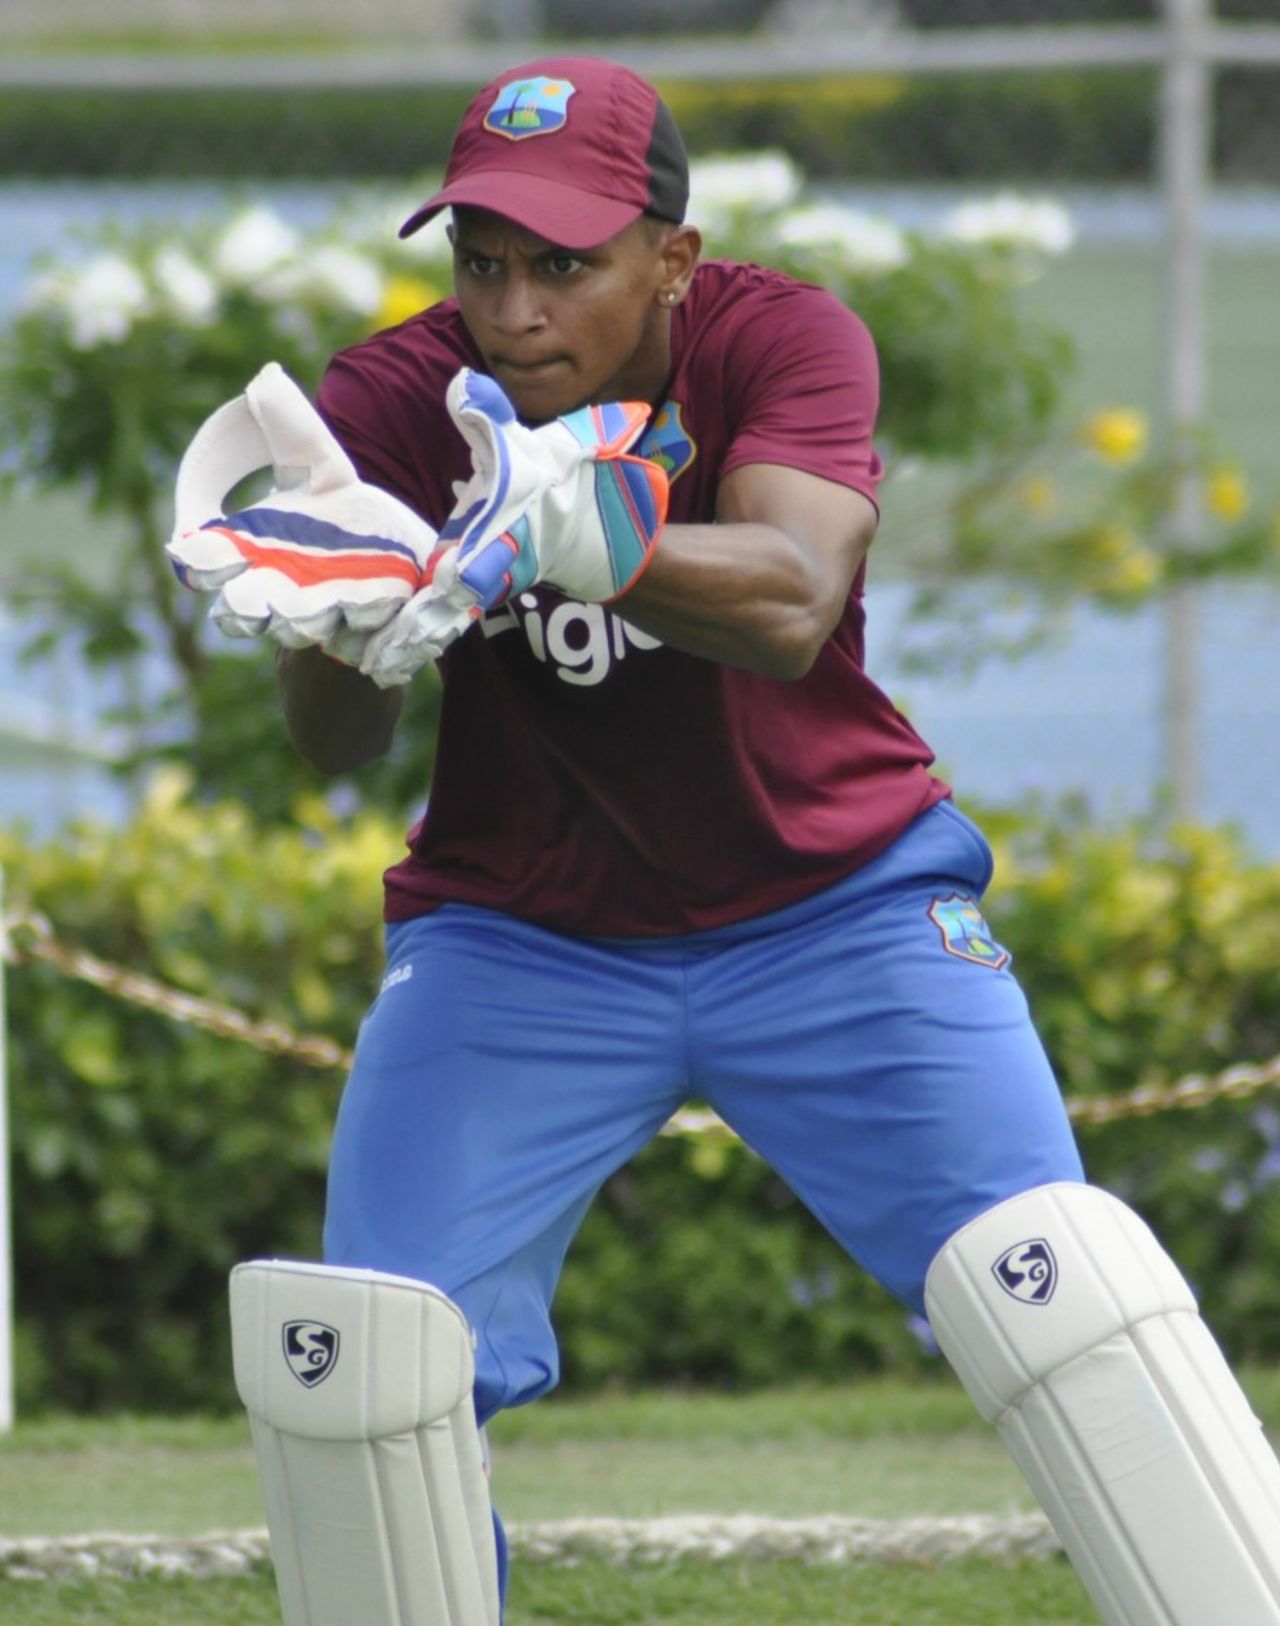 Shane Dowrich participates in wicket-keeping drills, Barbados, July 15, 2016